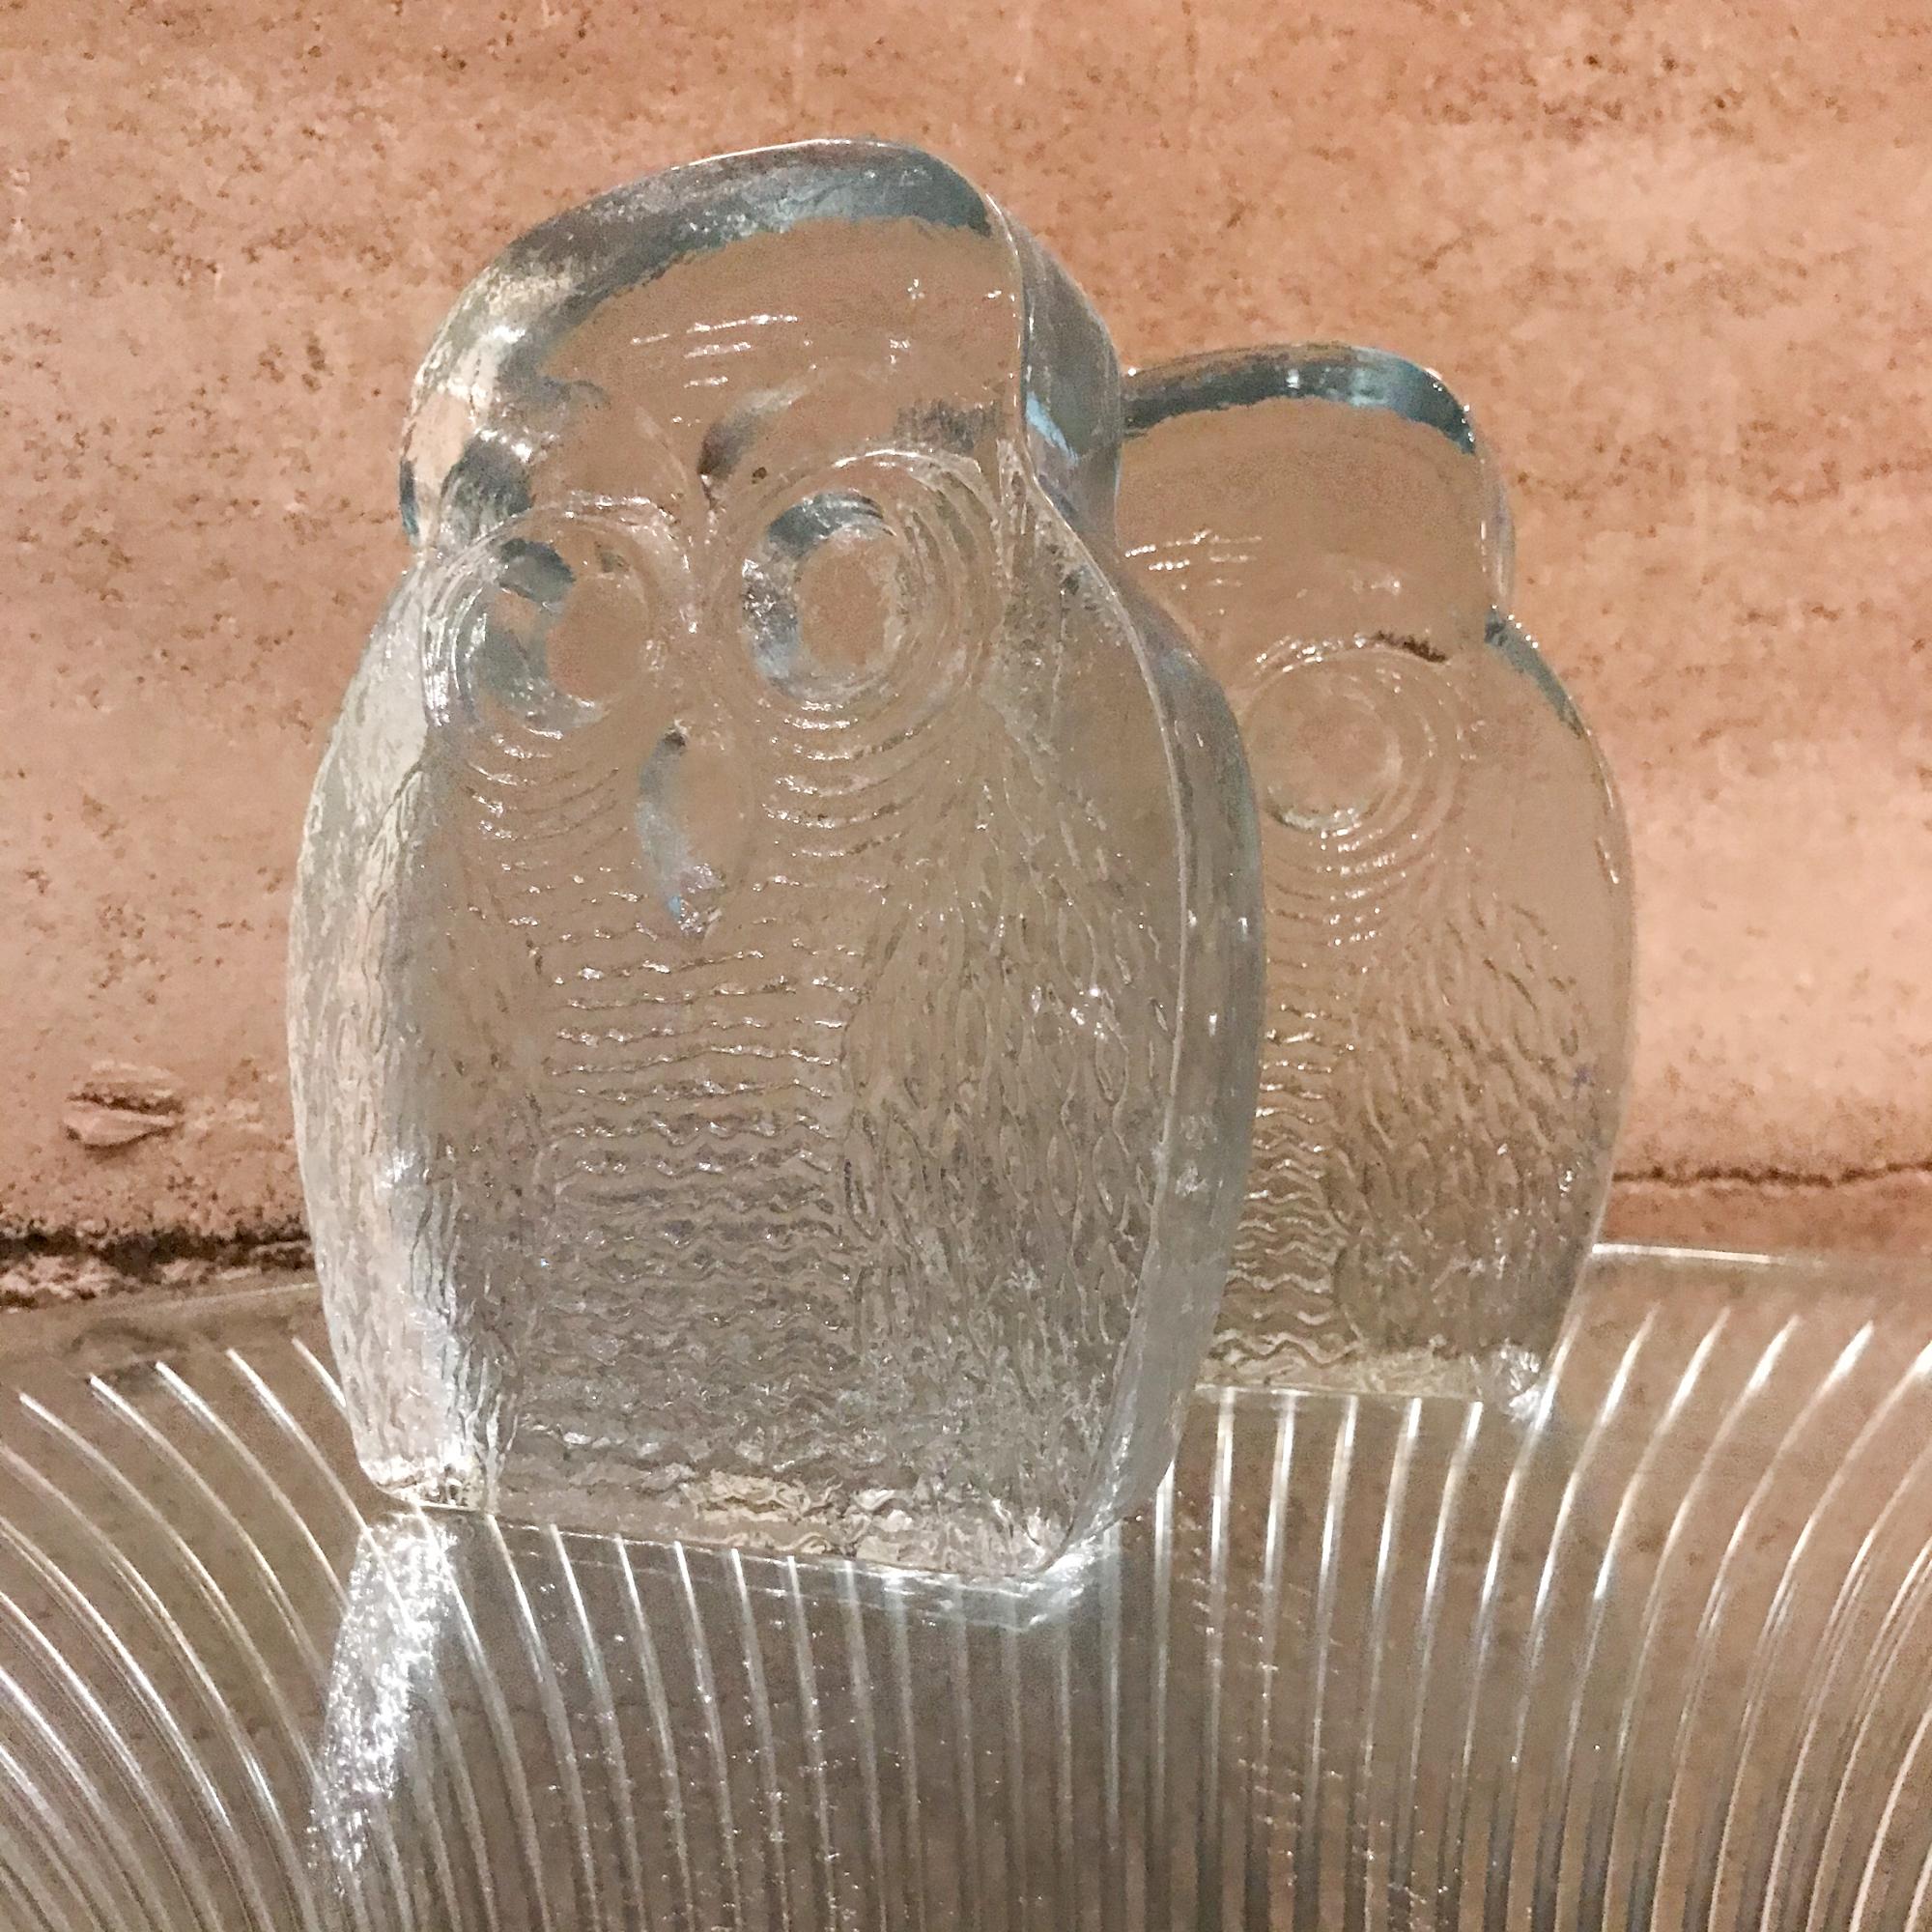 Bookends
Modern Handblown Glass OWL Bookends by BLENKO WV
Thick clear solid Glass bookends designed by Joel Myers for Blenko.
No label present.
Measures: 6.75 + .13 x 5.5 W x 1.75 D
Original Preowned Unrestored Good Vintage Condition.
Refer to